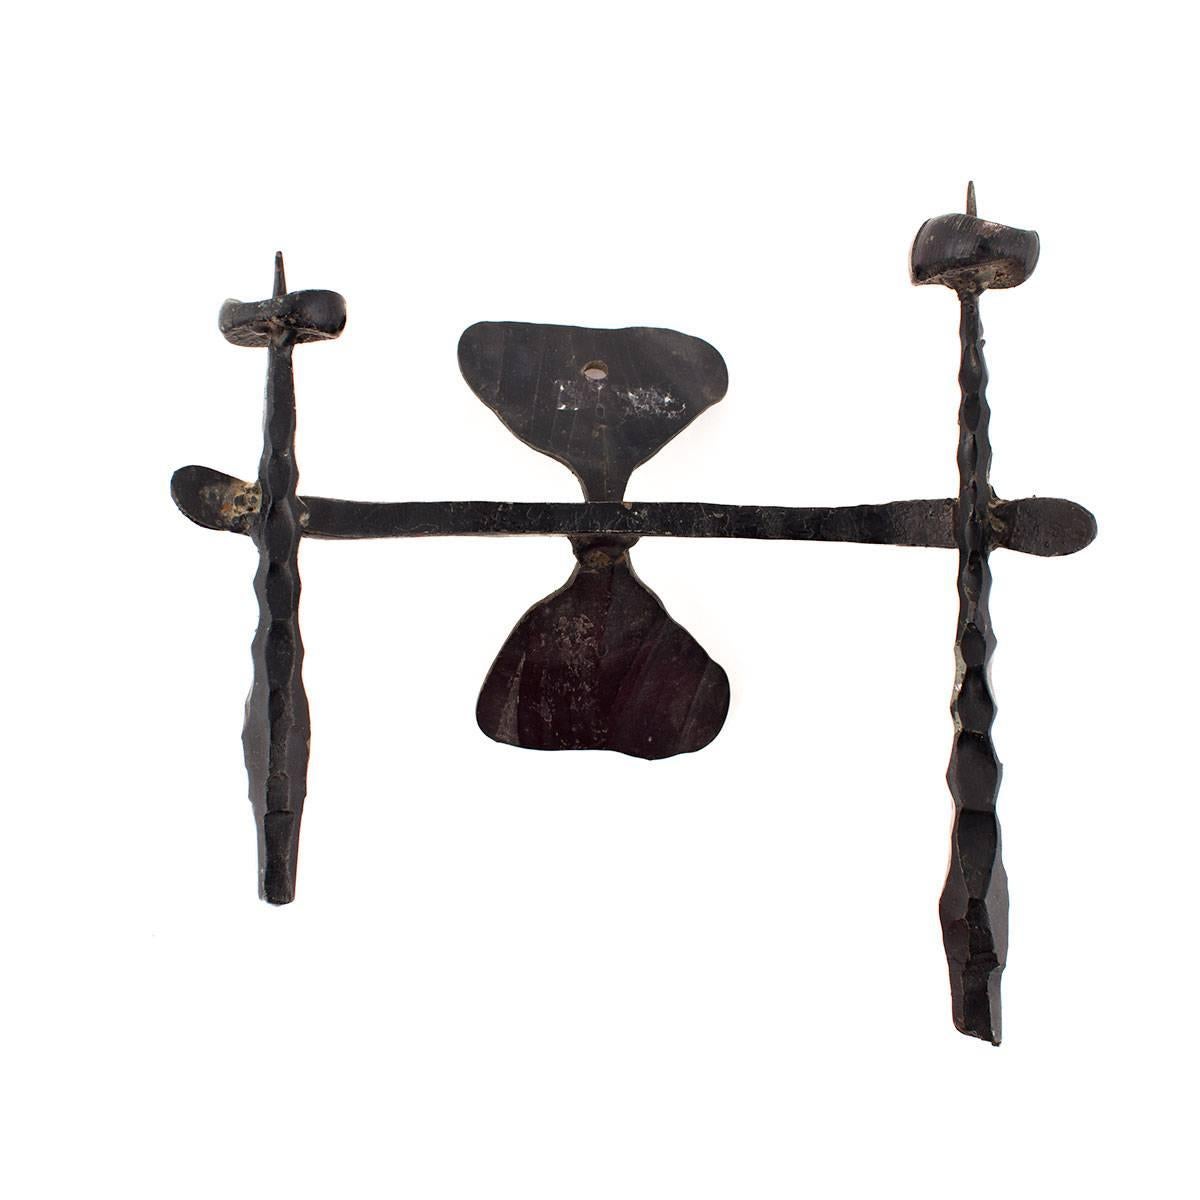 Hand Forged Iron Sconce Candelabra 
Holocaust Memorial Judaic Wall Sconce Sculpture


David Palombo was an Israeli sculptor and painter. He was born in Turkey to a traditional family and immigrated to the Land of Israel with his parents in 1923.